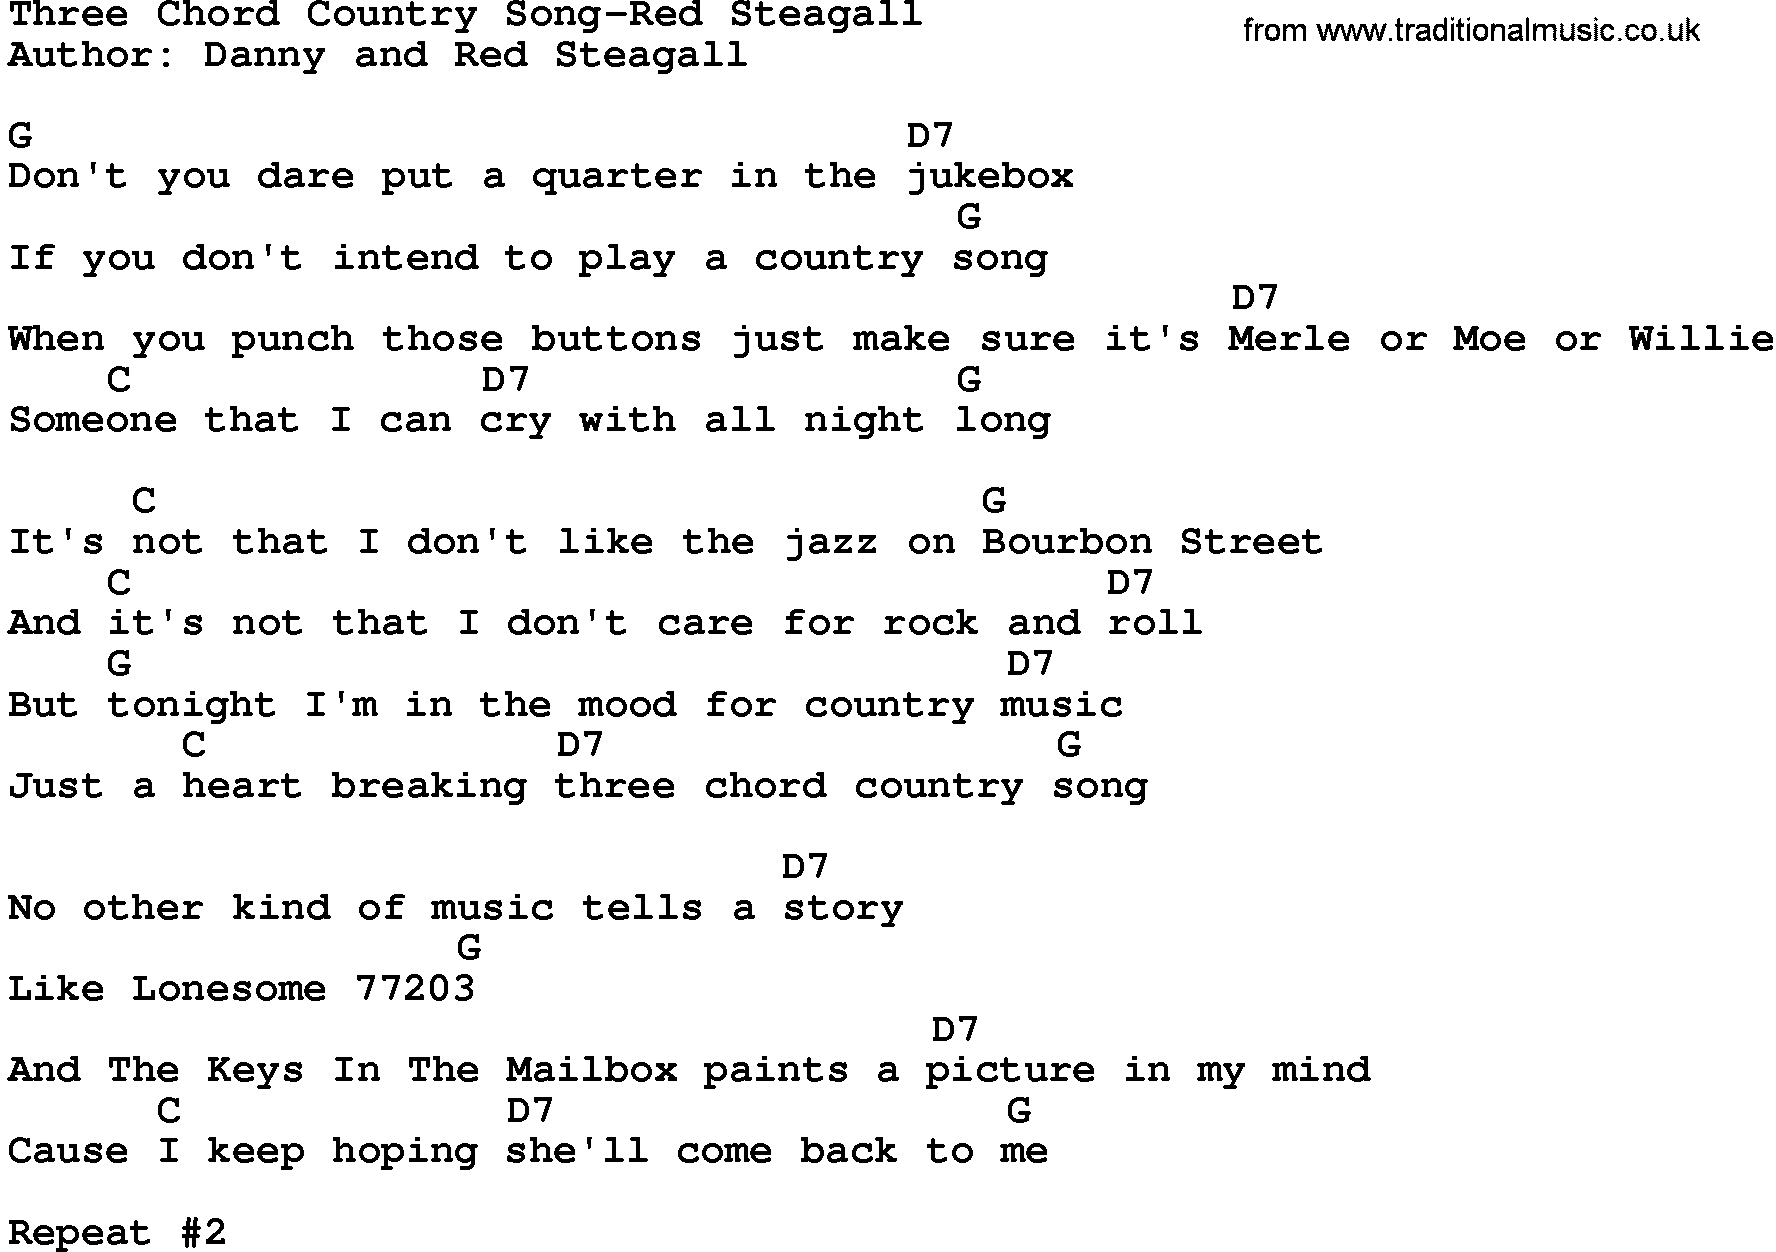 Country music song: Three Chord Country Song-Red Steagall lyrics and chords